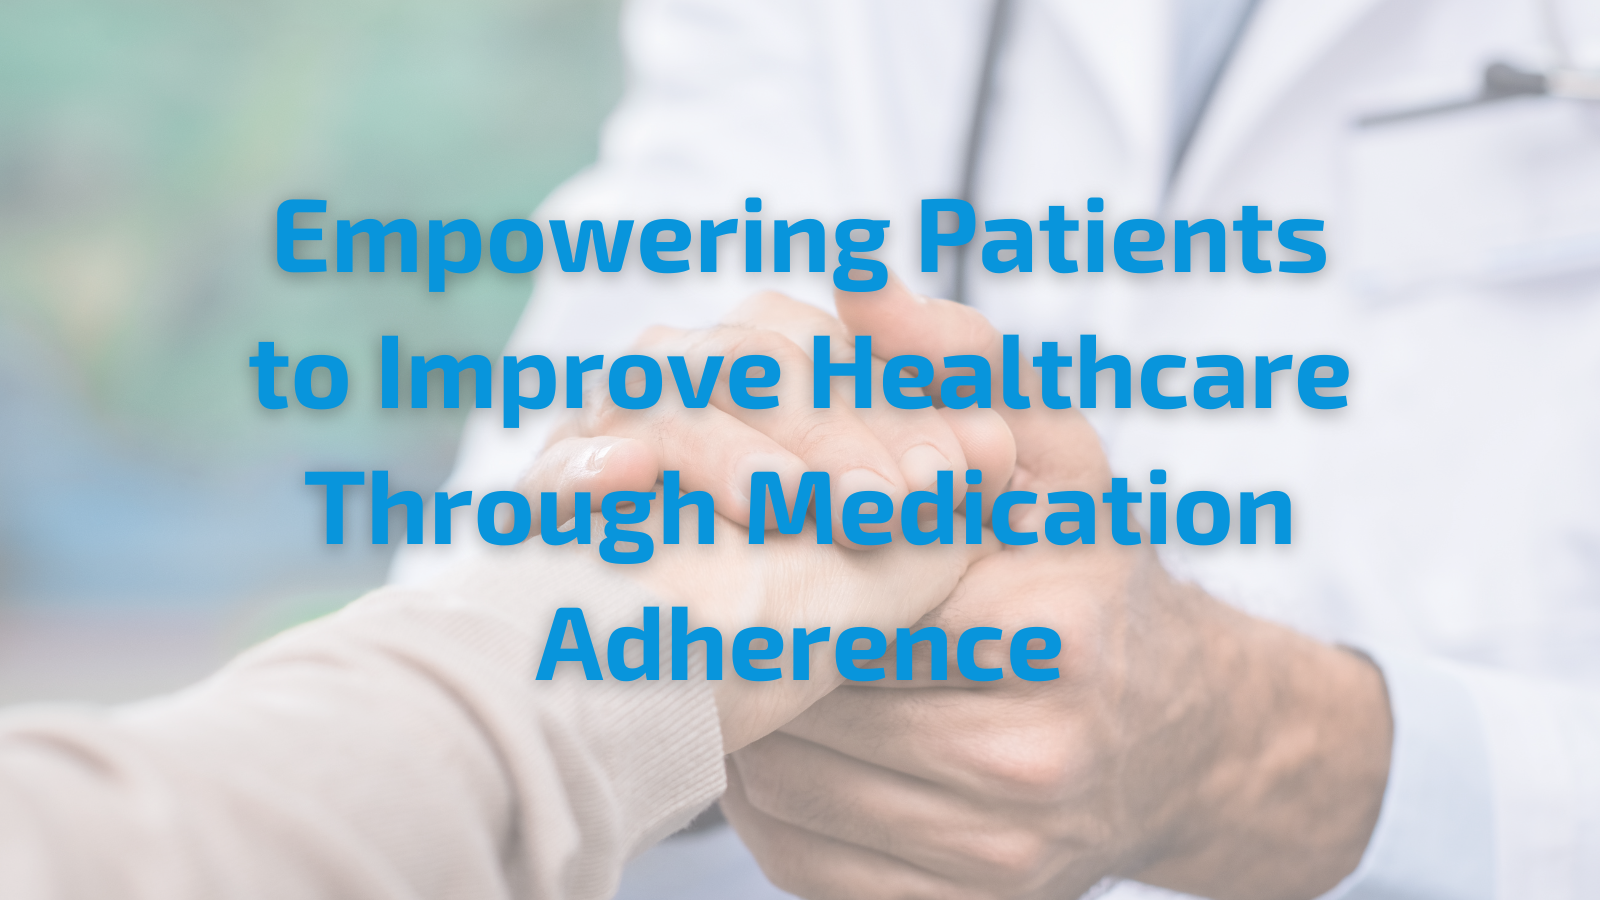 Empowering Patients to Improve Healthcare Through Medication Adherence